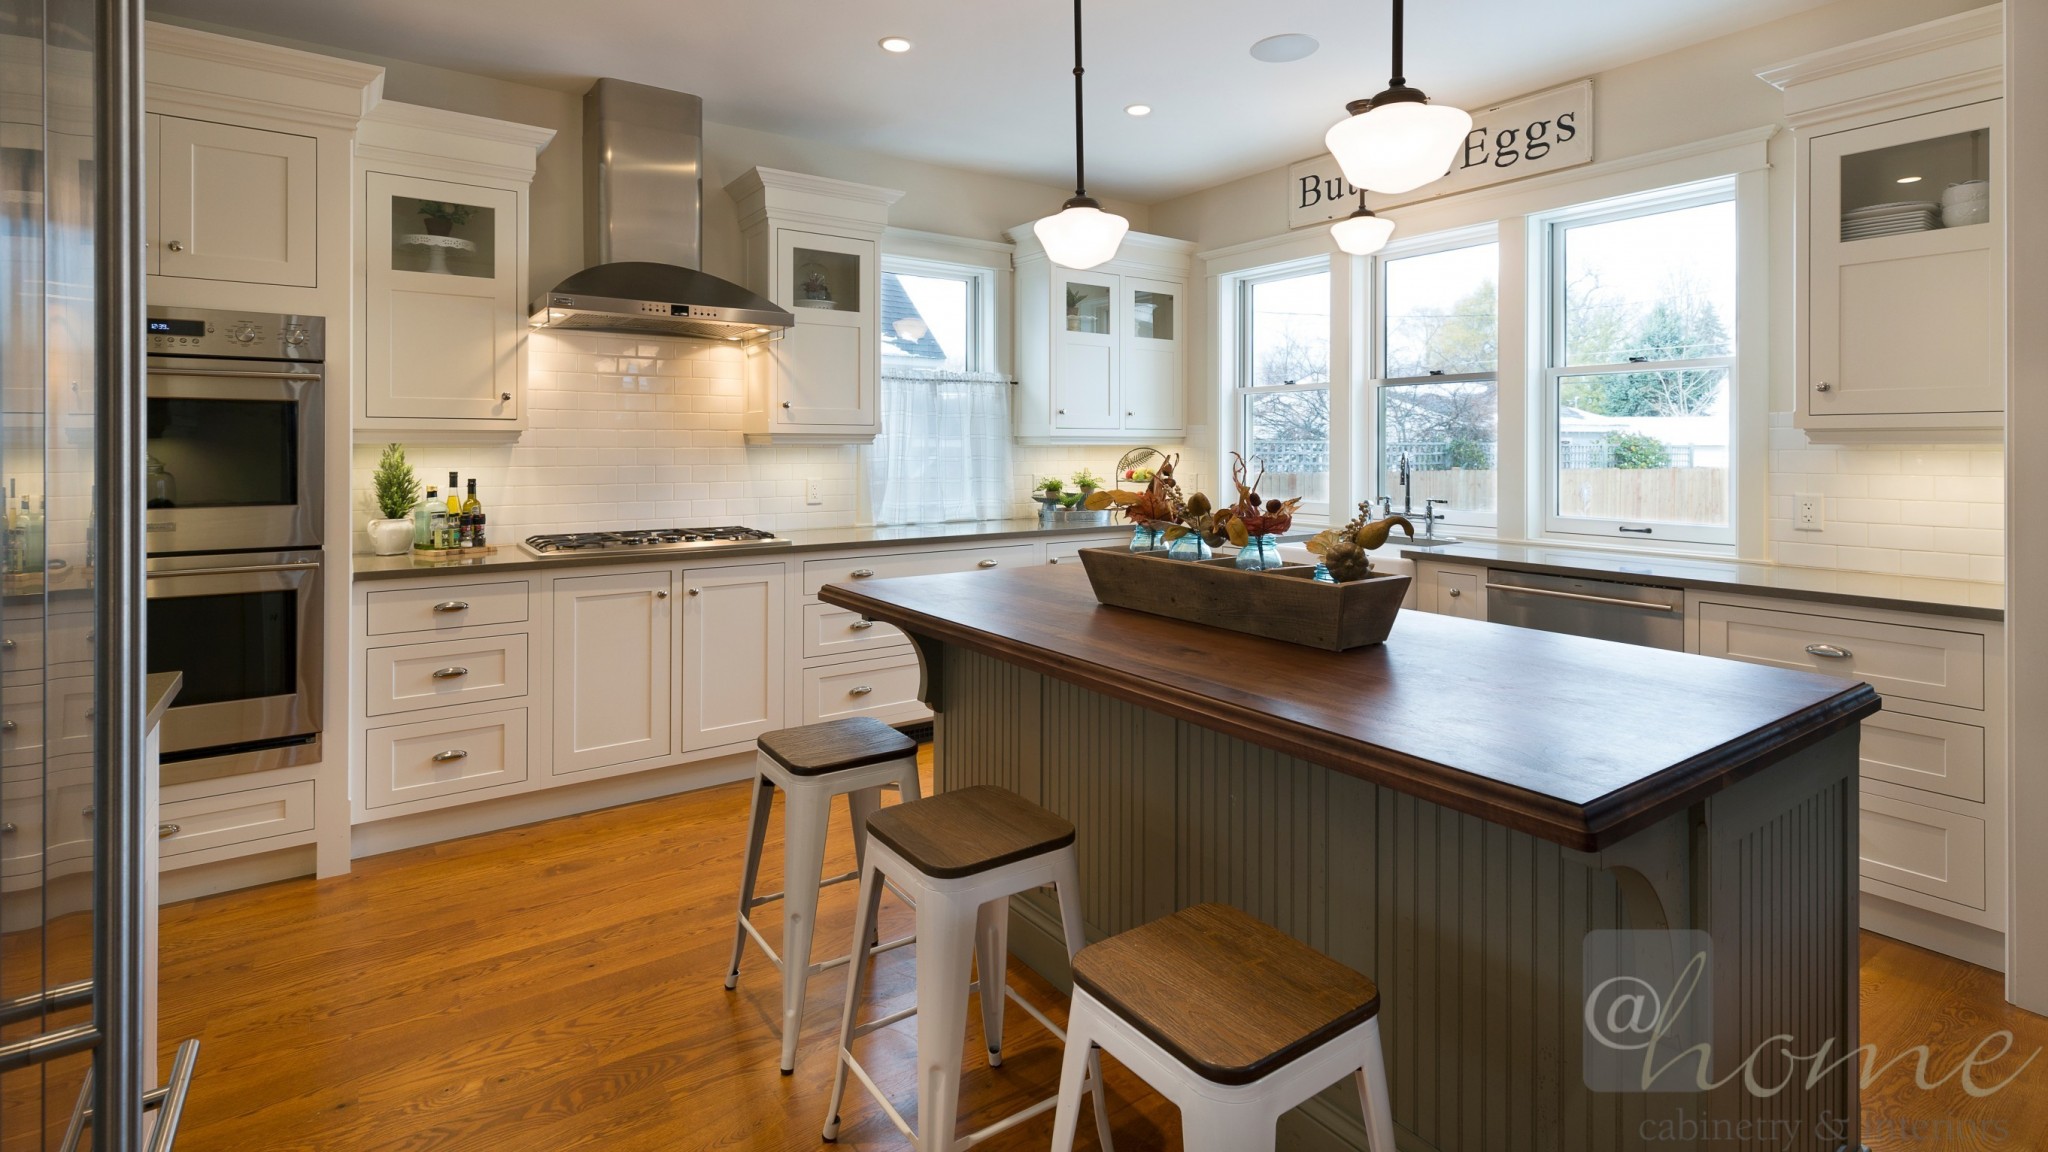 newly redesigned kitchen is a joy to cook and entertain in